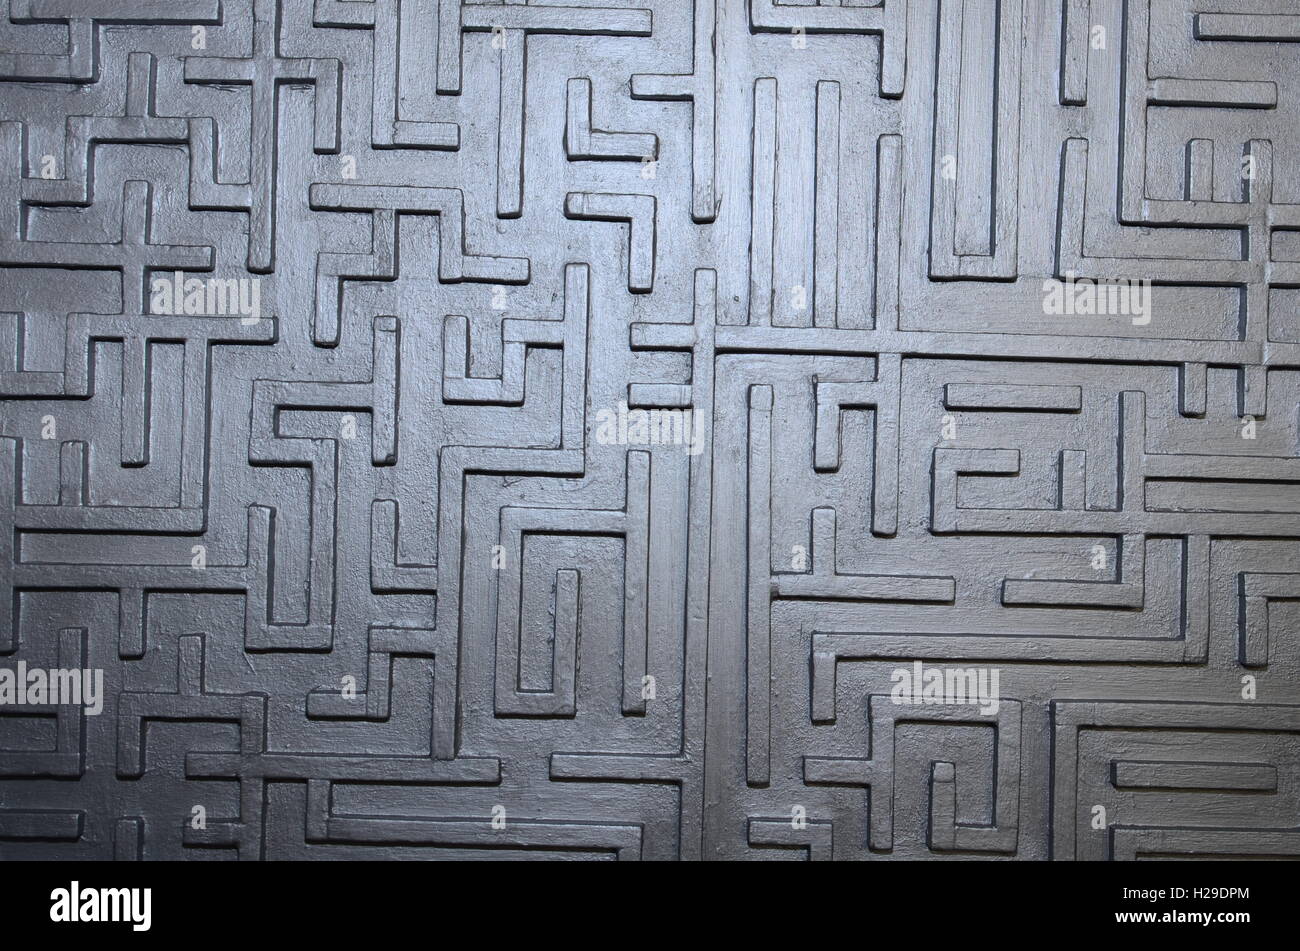 Pictures taken during the construction of handmade wooden labyrinths and mazes decorative panels and some mosaics . Stock Photo